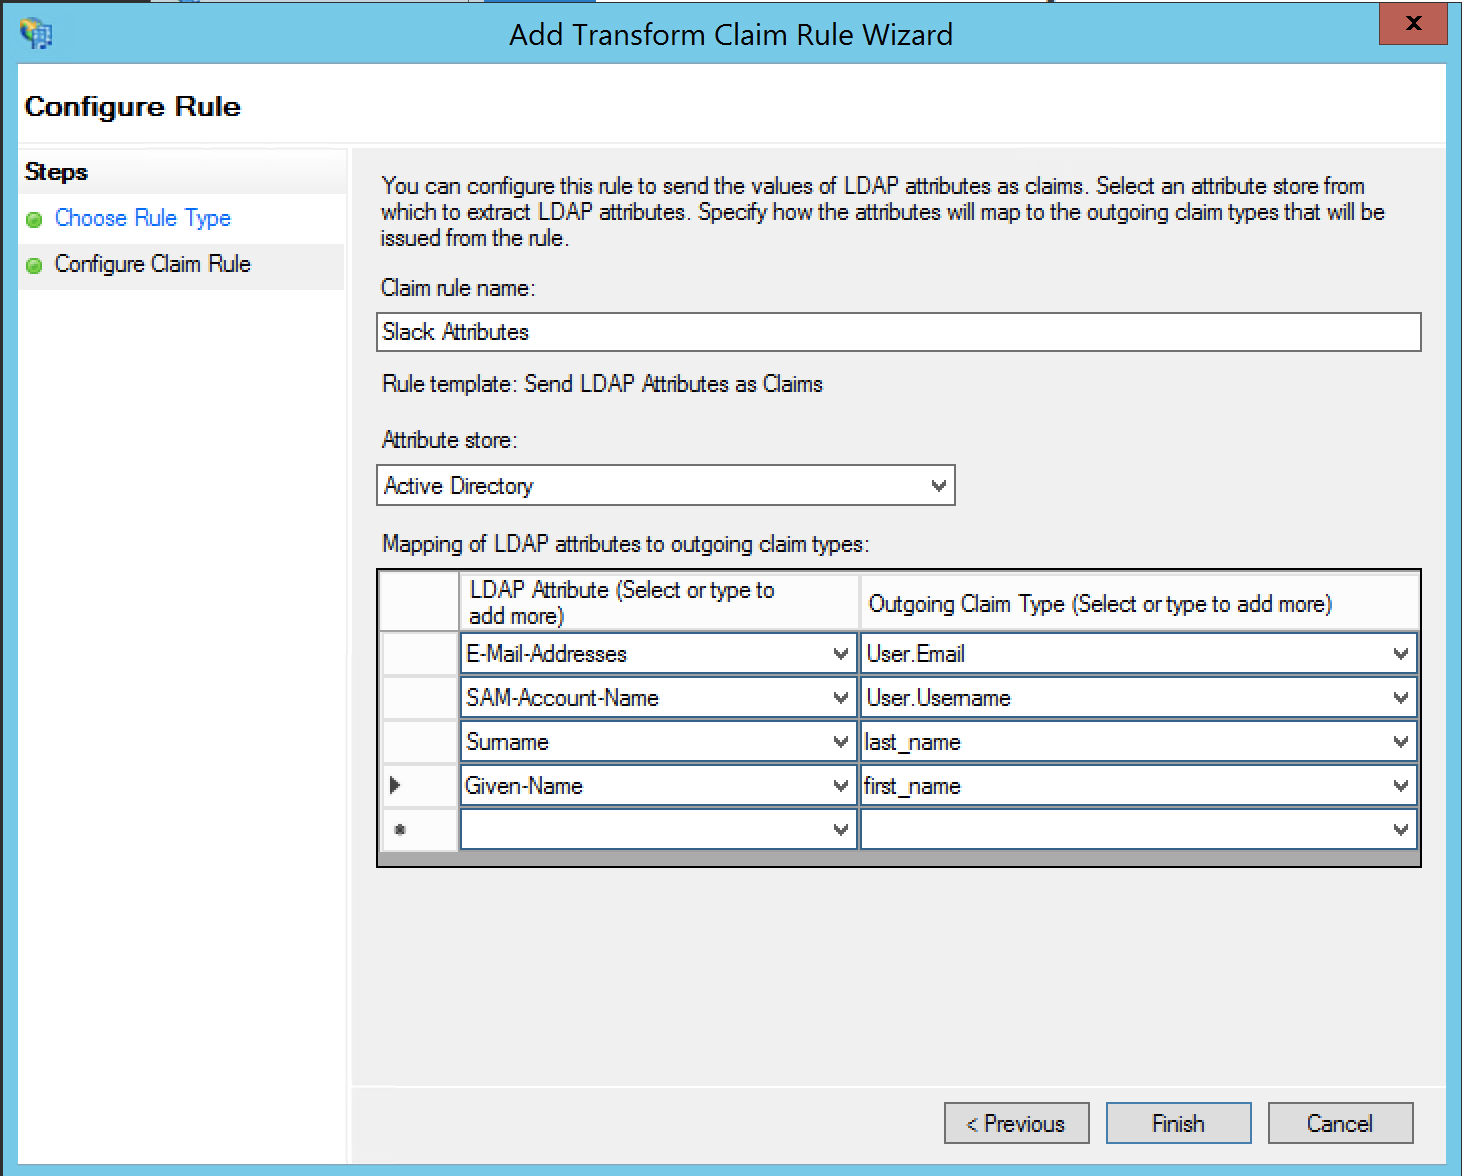 Configure Claim Rule step, showing list of LDAP Attributes and Outgoing Claim Types